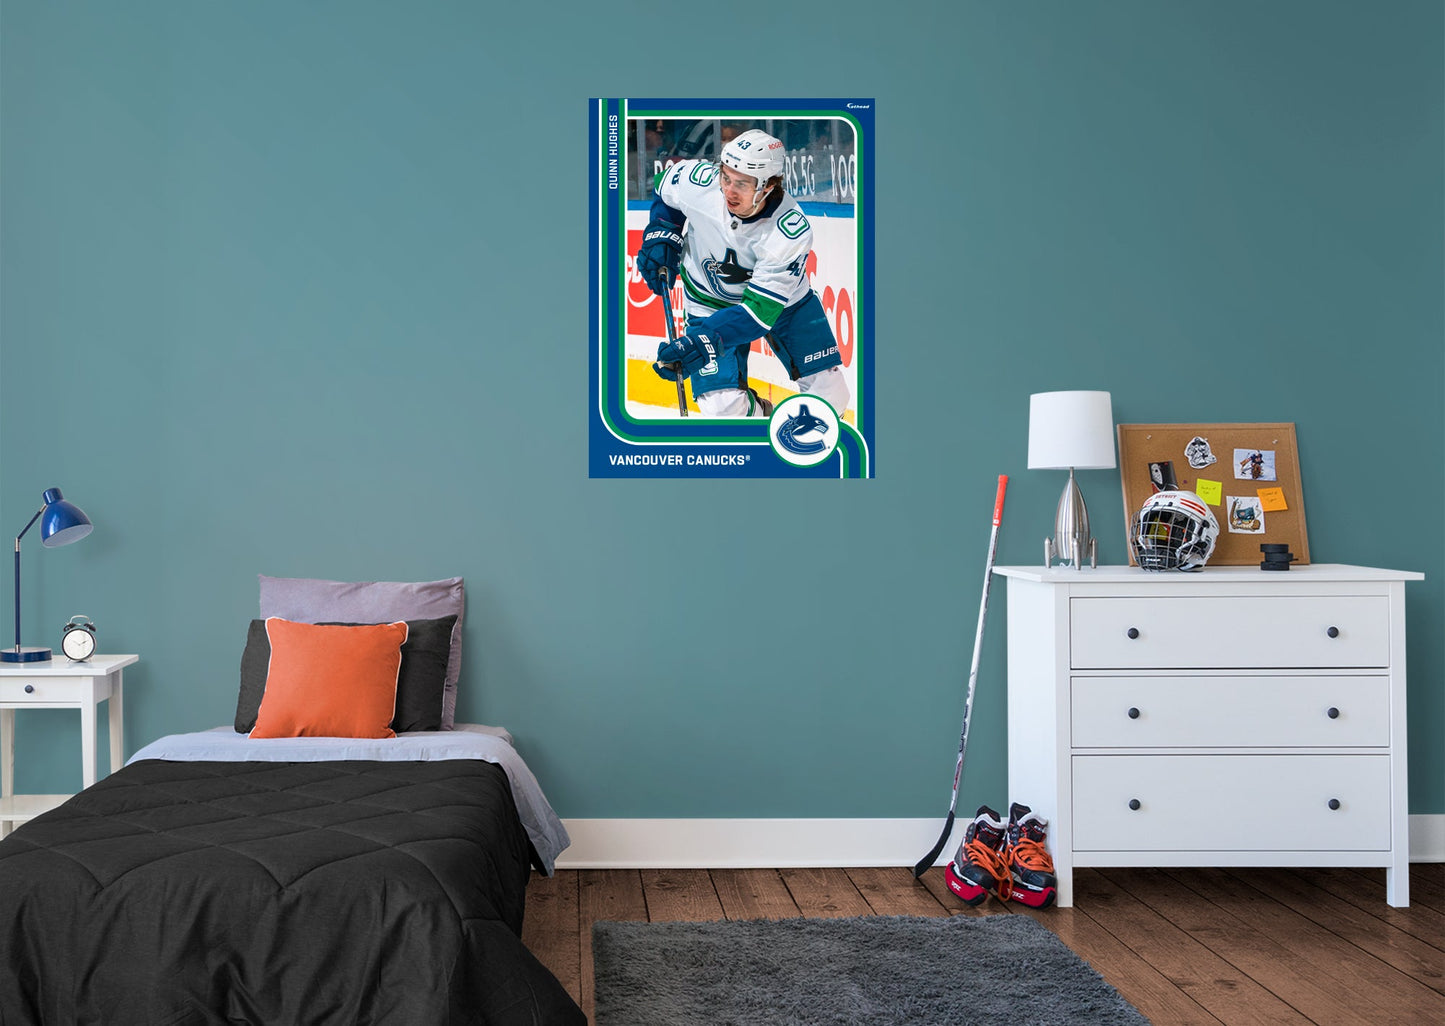 Vancouver Canucks: Quinn Hughes Poster - Officially Licensed NHL Removable Adhesive Decal